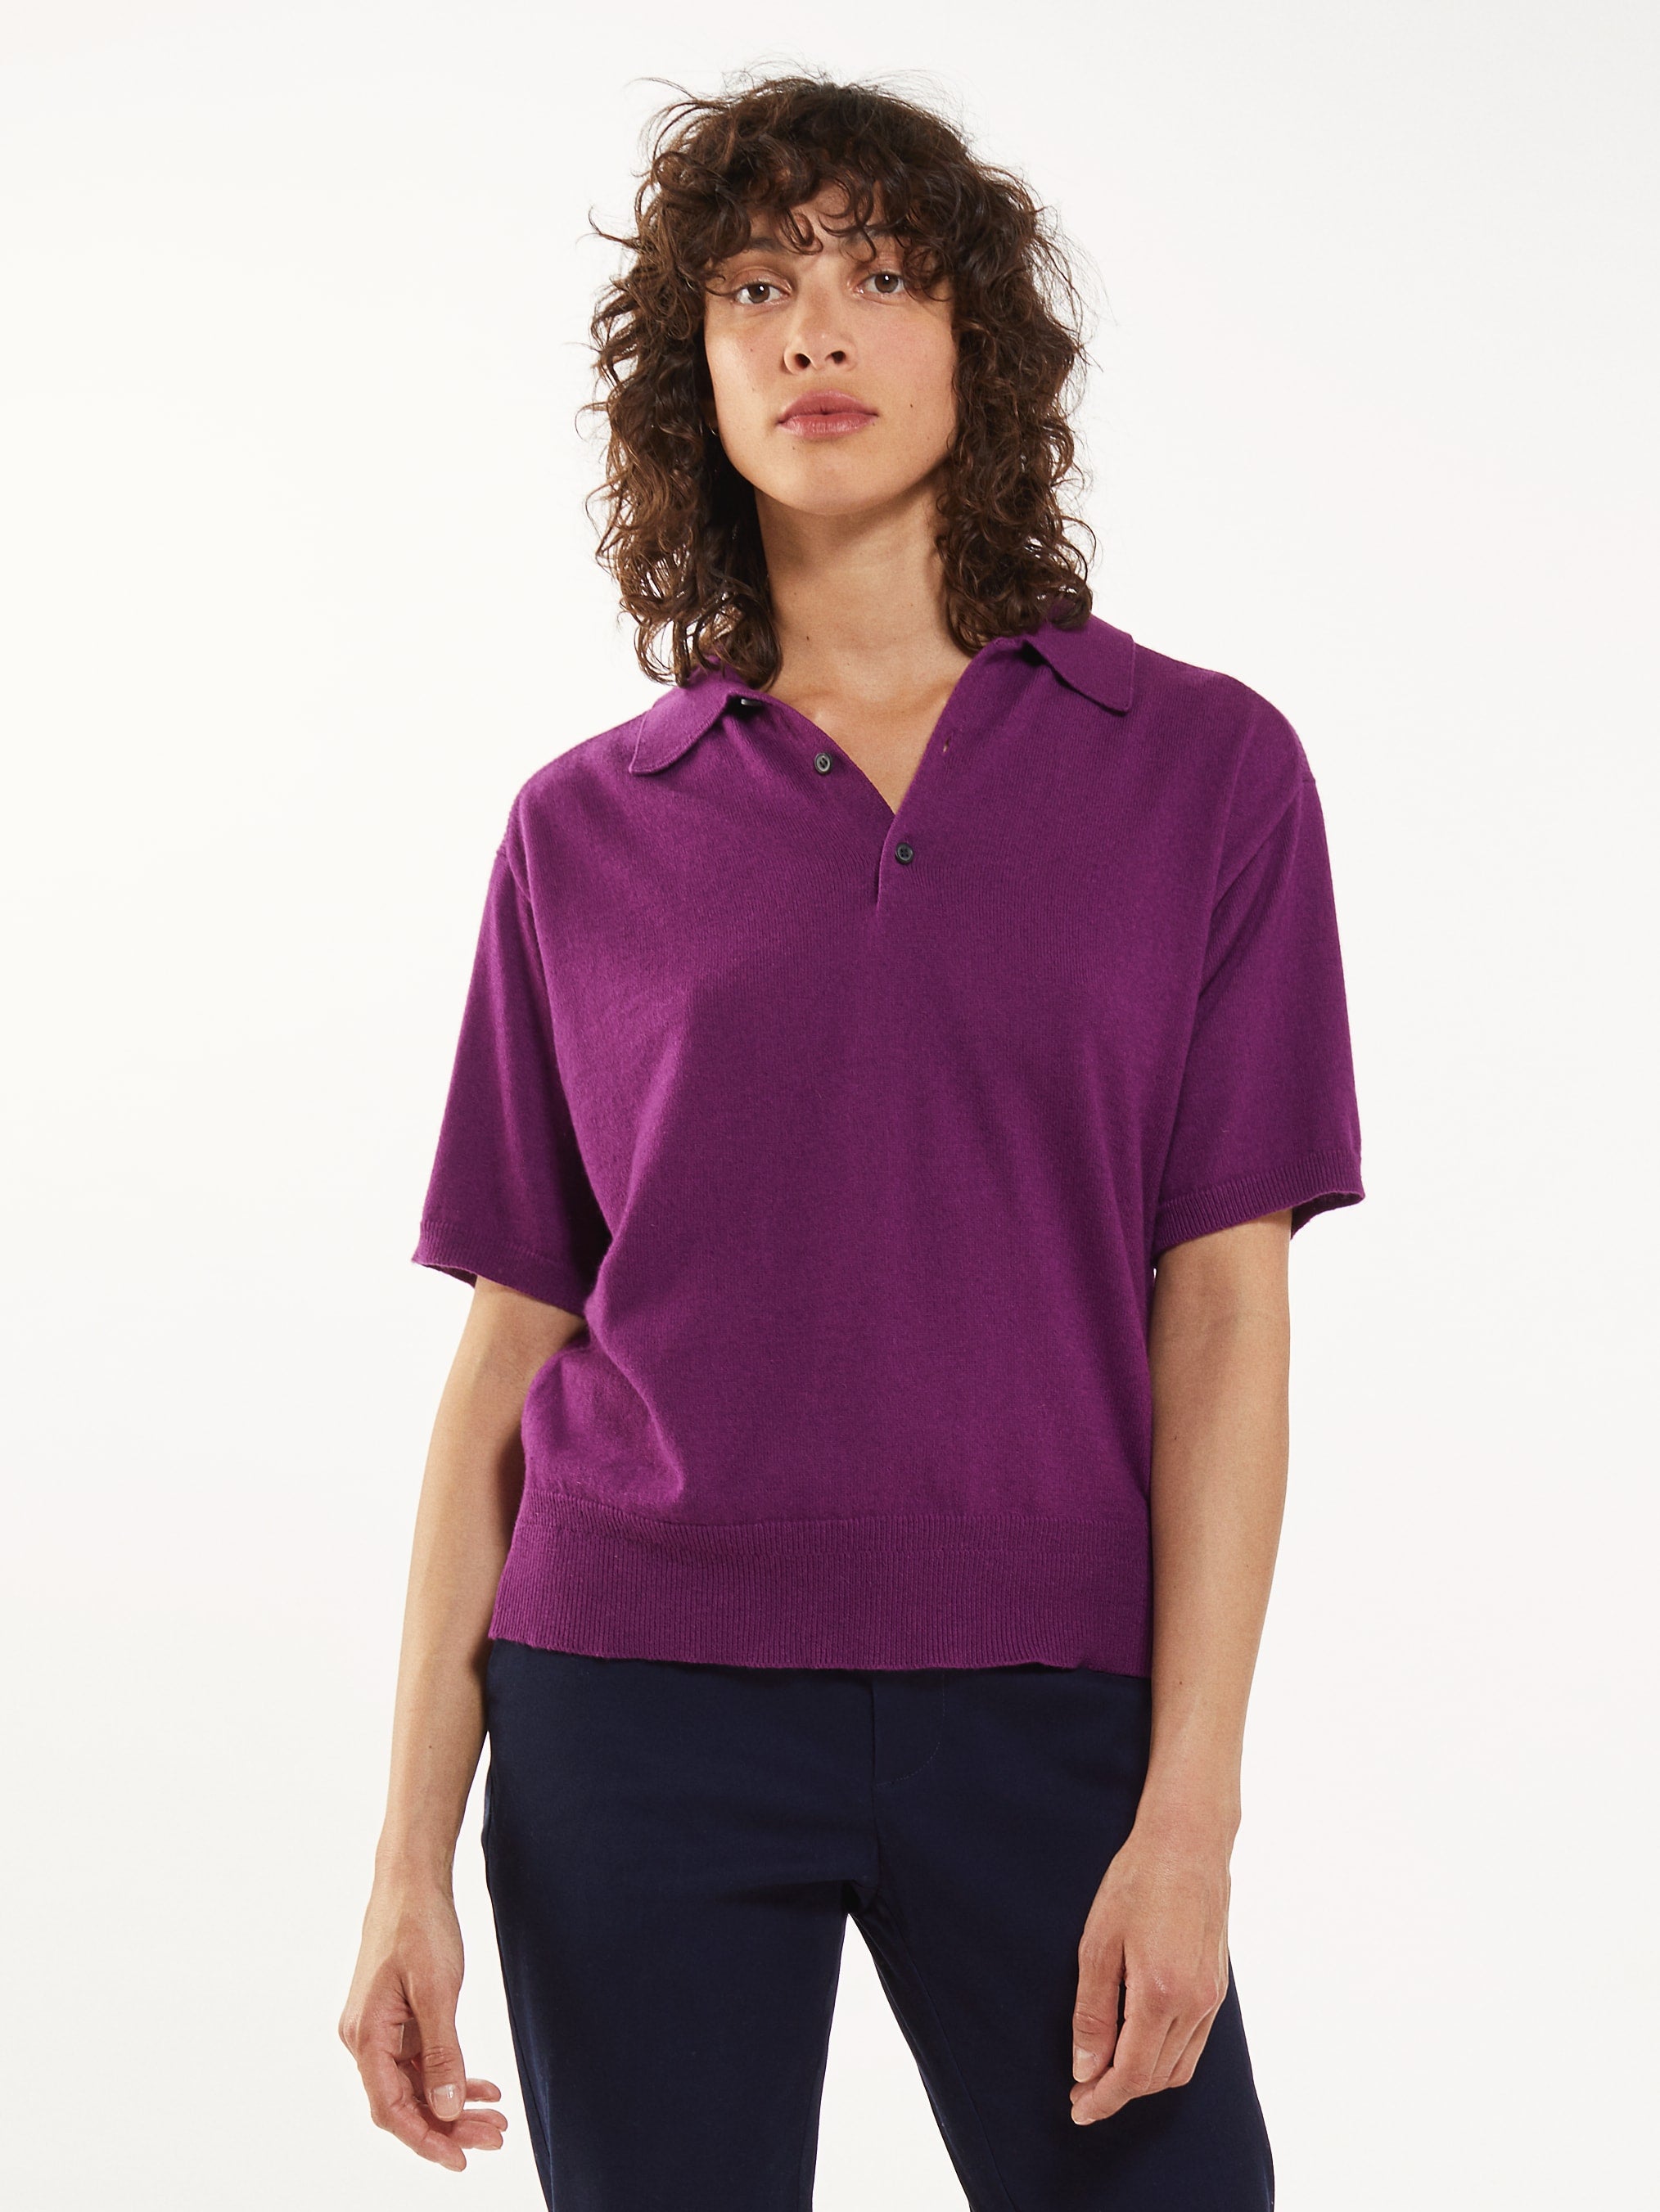 Women's polo shirt in recycled Cashmere and Magenta cotton